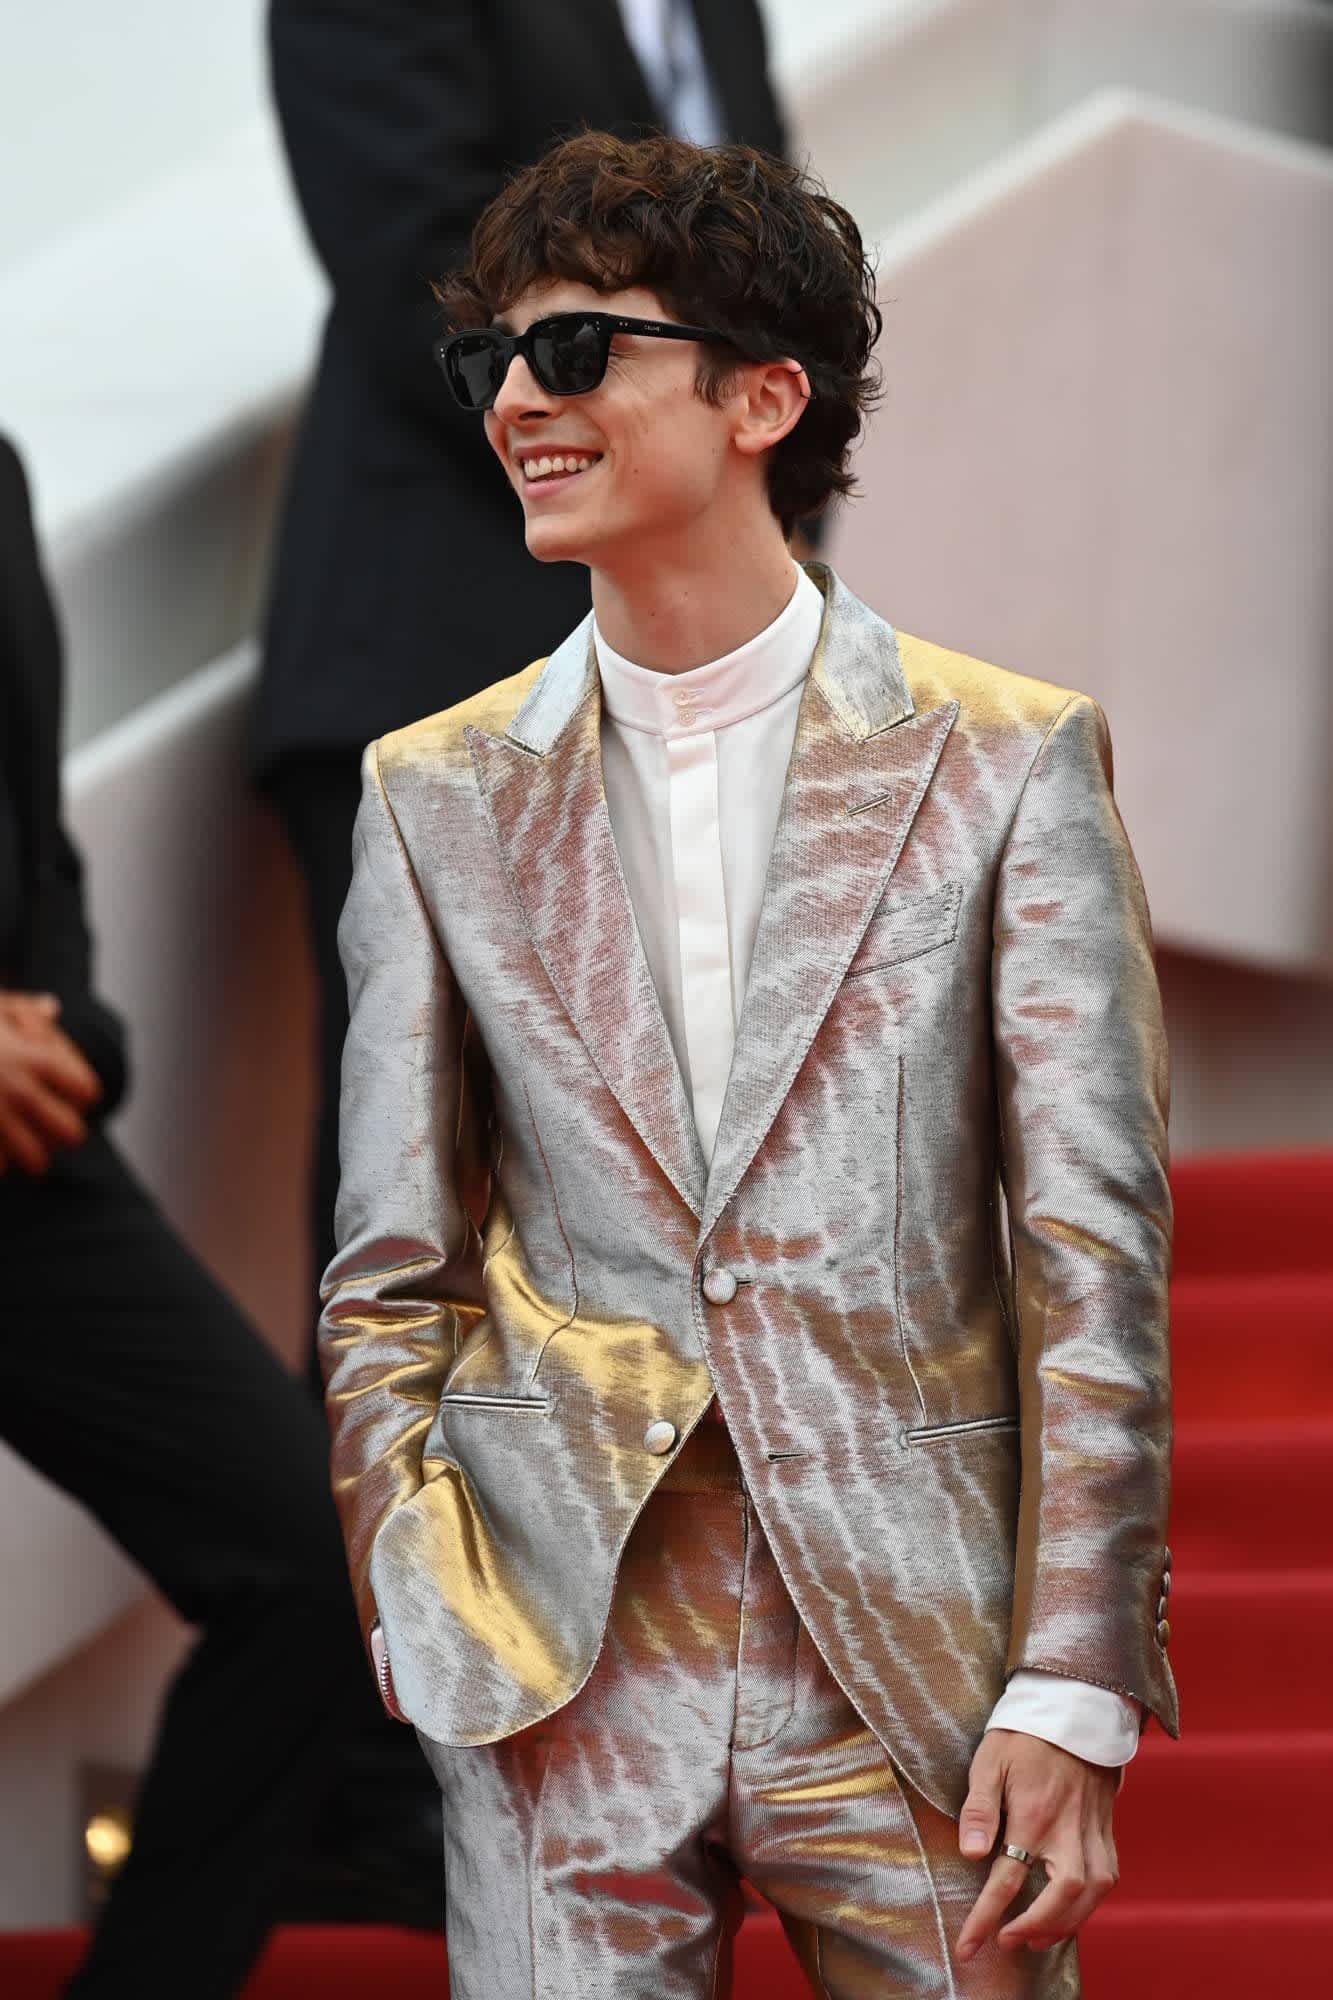 Timothee Chalet's Cartier jewelry at 2021 Cannes Film Festival